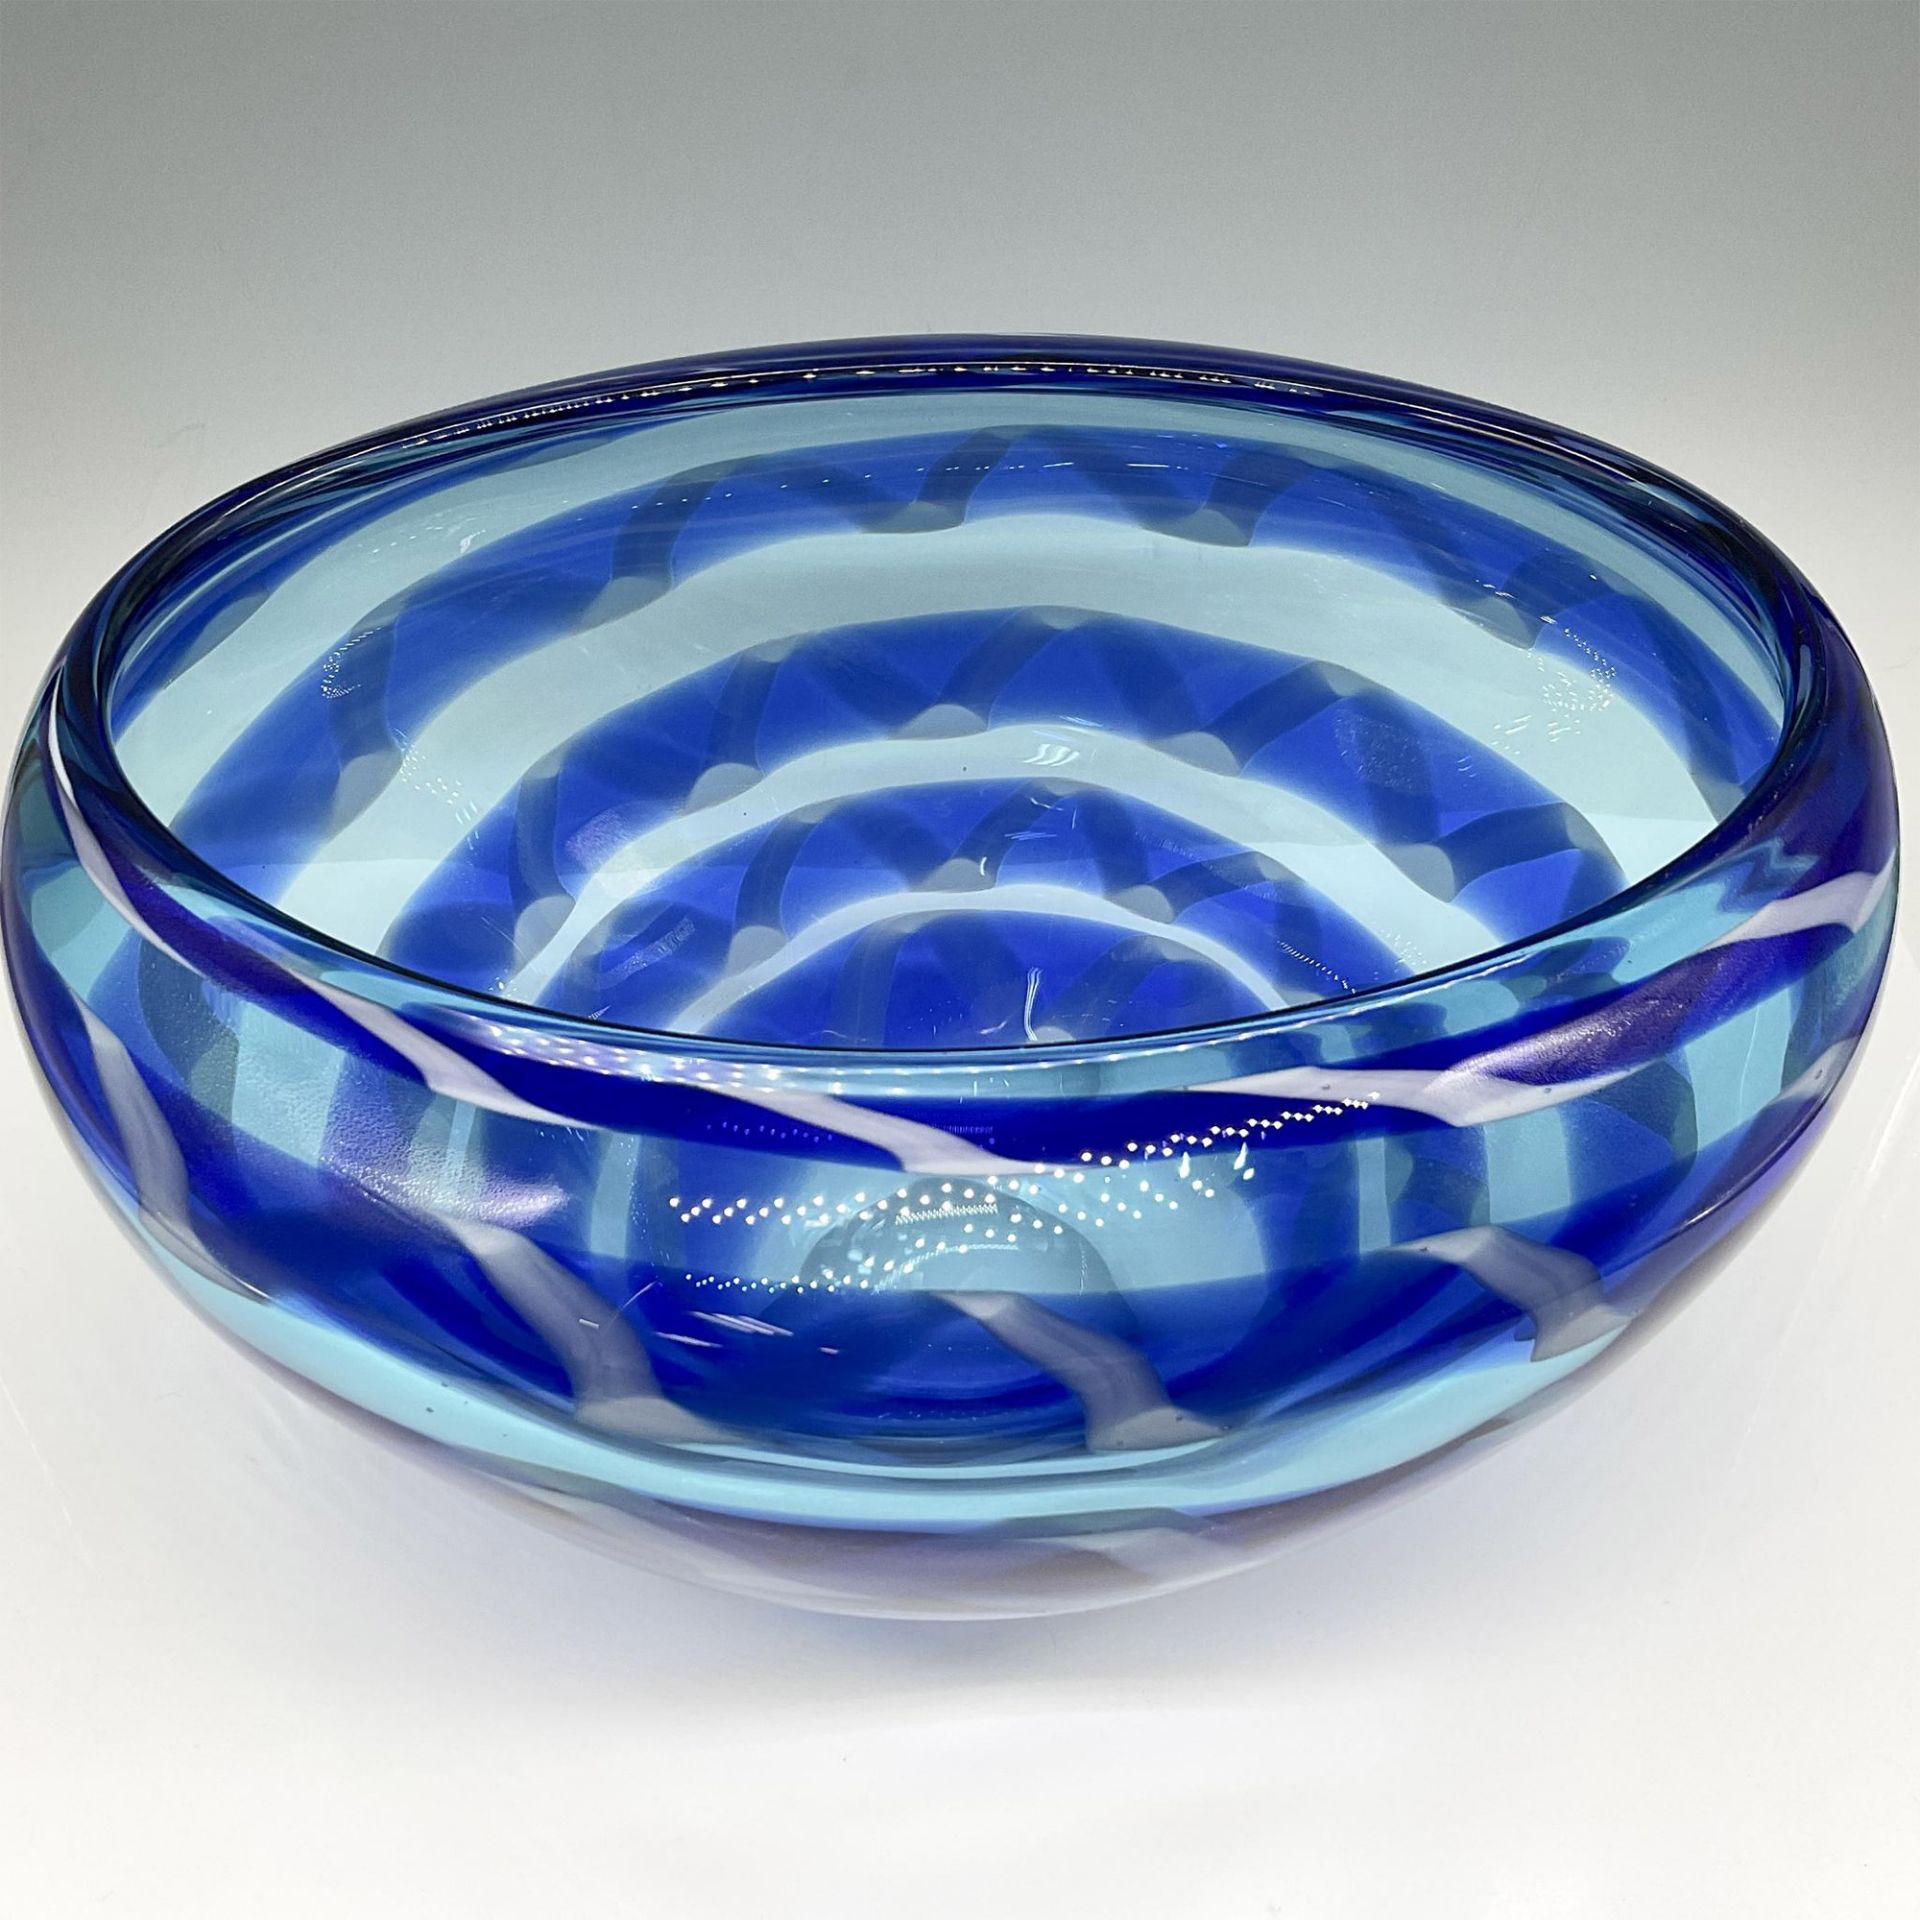 Evolution by Waterford Crystal Blue Centerpiece Bowl - Image 2 of 3